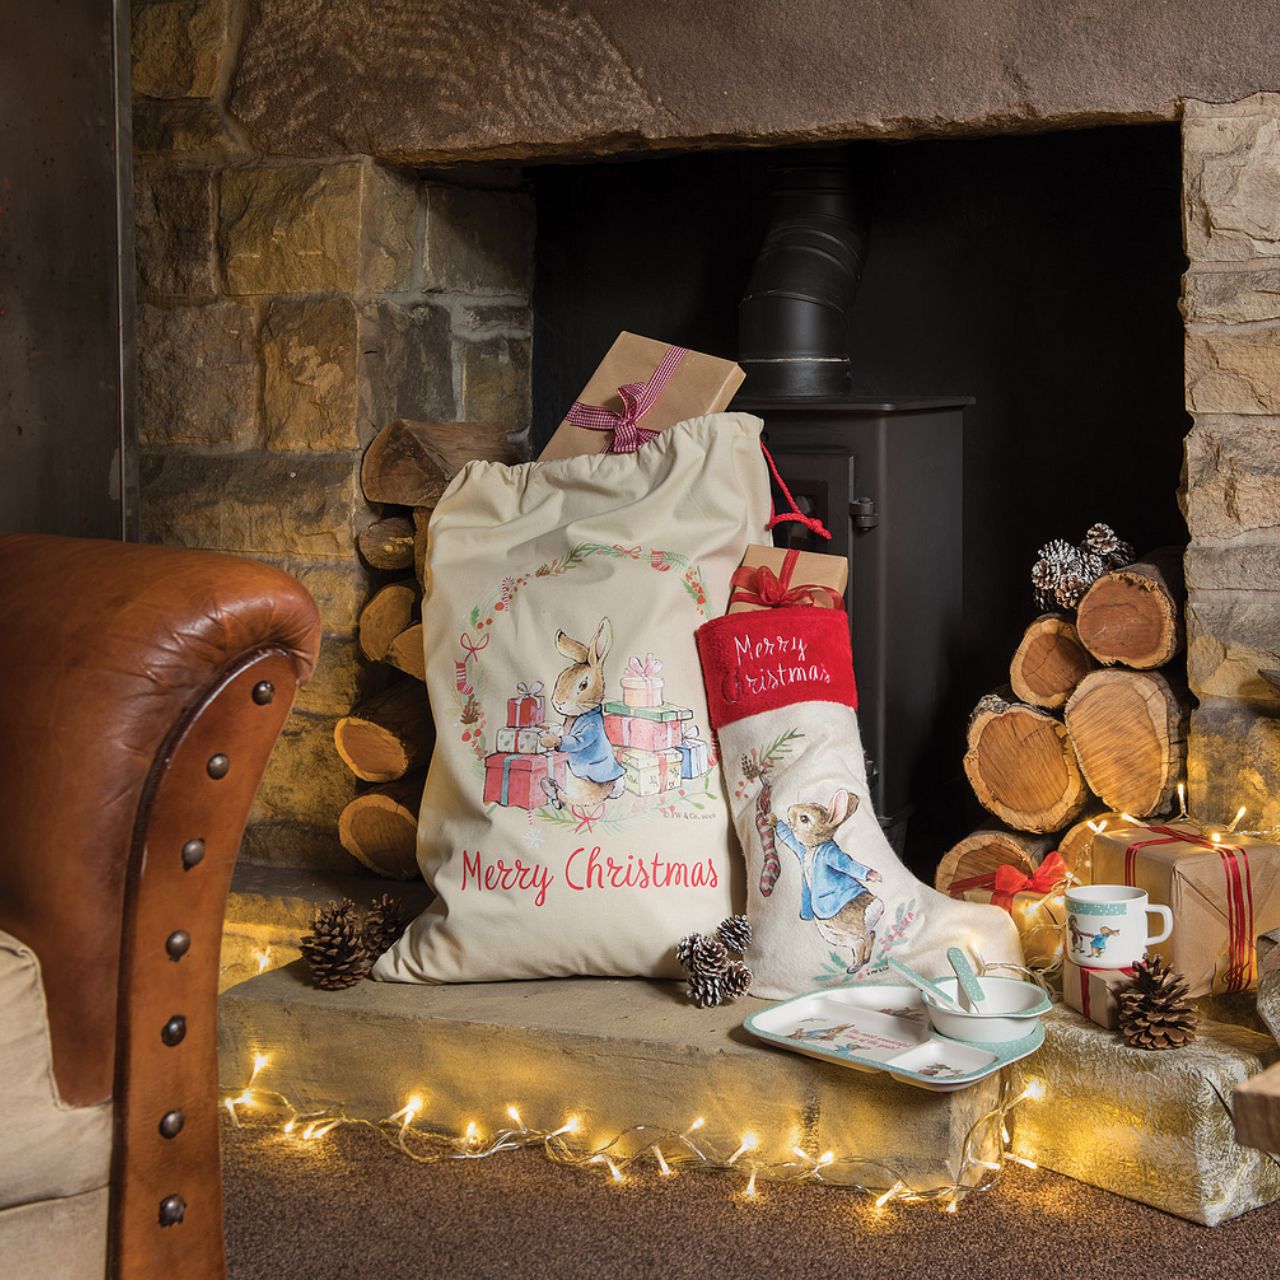 Beatrix Potter Peter Rabbit Christmas Stocking  As families cherish Christmas, we have just the gift that will make this occasion extra special. Spread the joy of Christmas with this beautiful Peter Rabbit Christmas Stocking. This unique Christmas gift will make a great traditional gift, which can be enjoyed year after year.